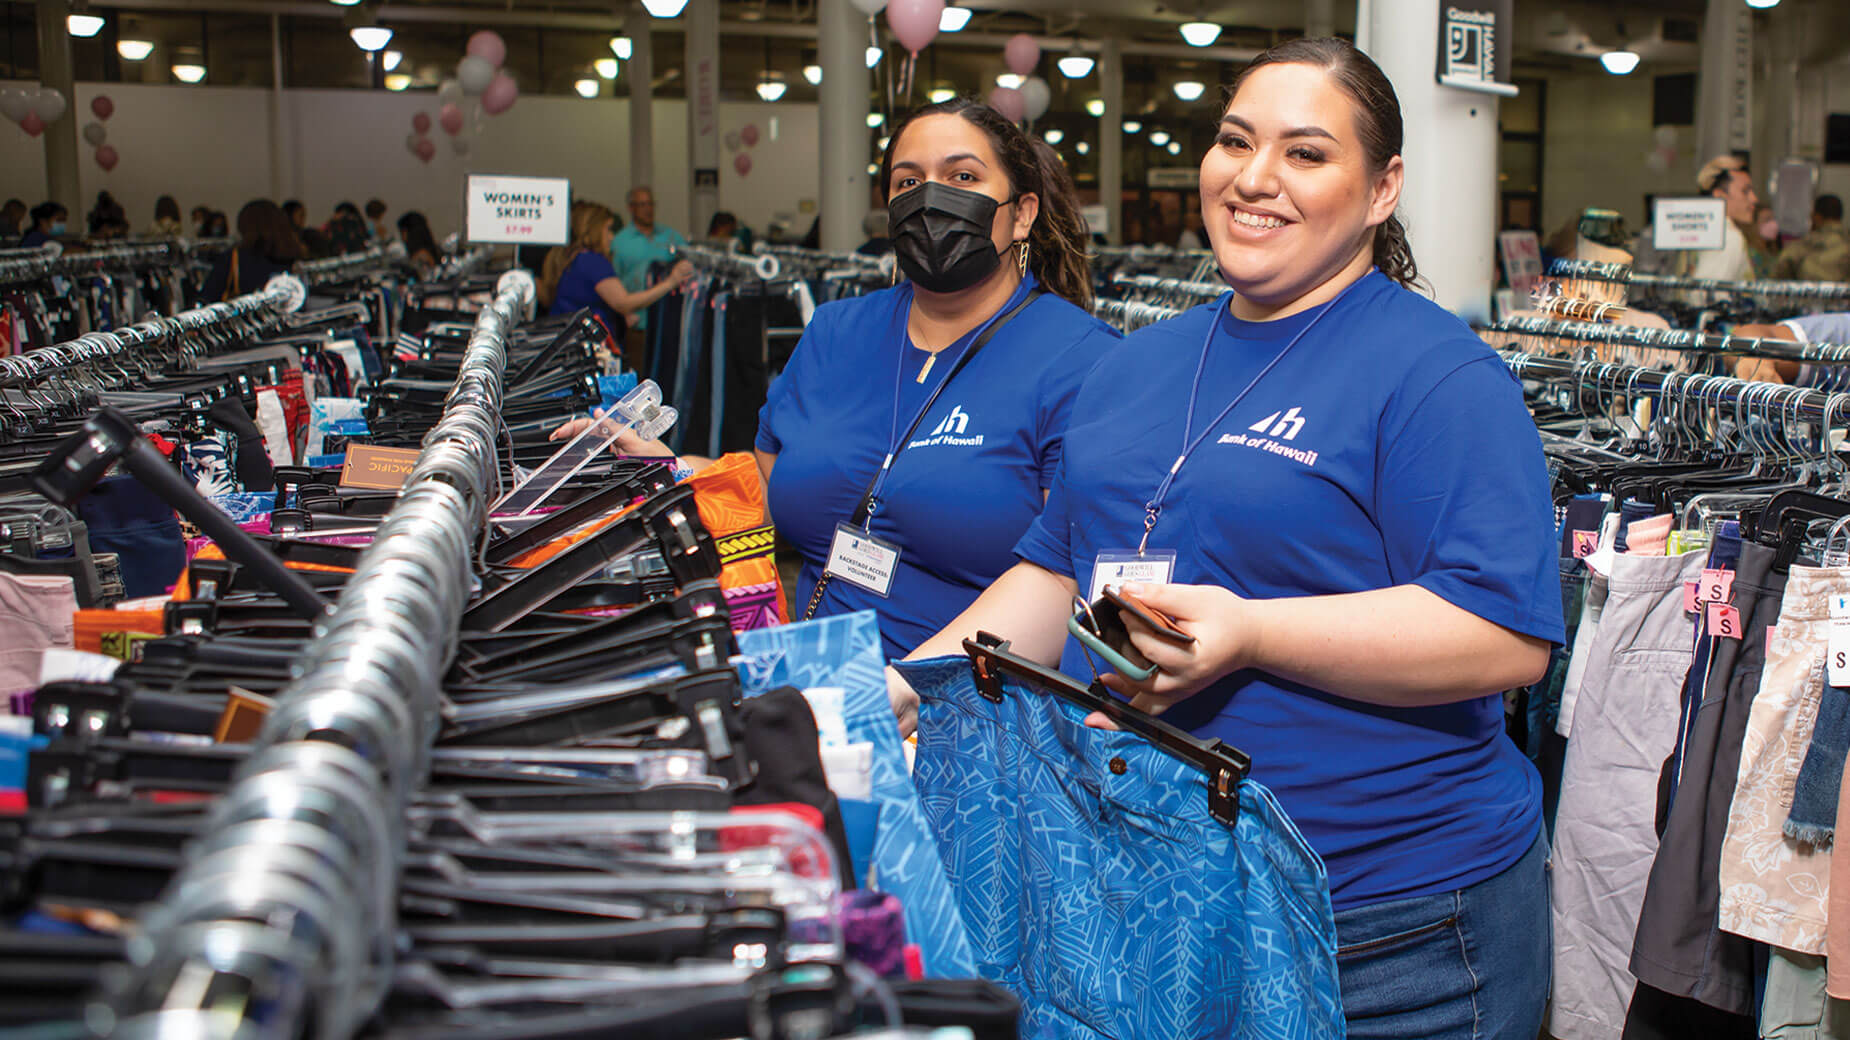 Volunteers at Goodwill Goes Glam